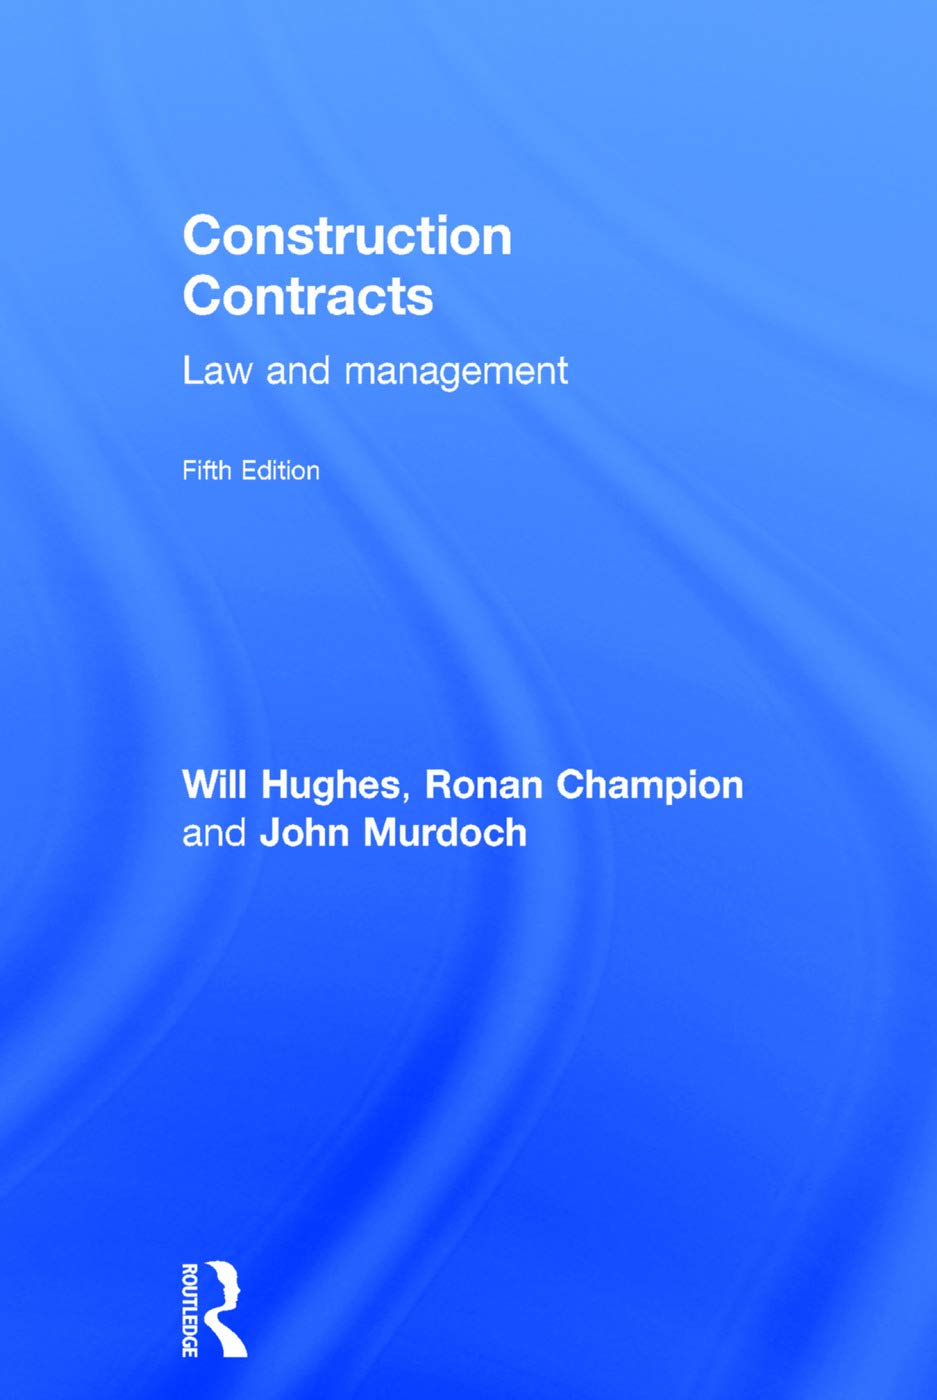 Construction Contracts 5th Edition